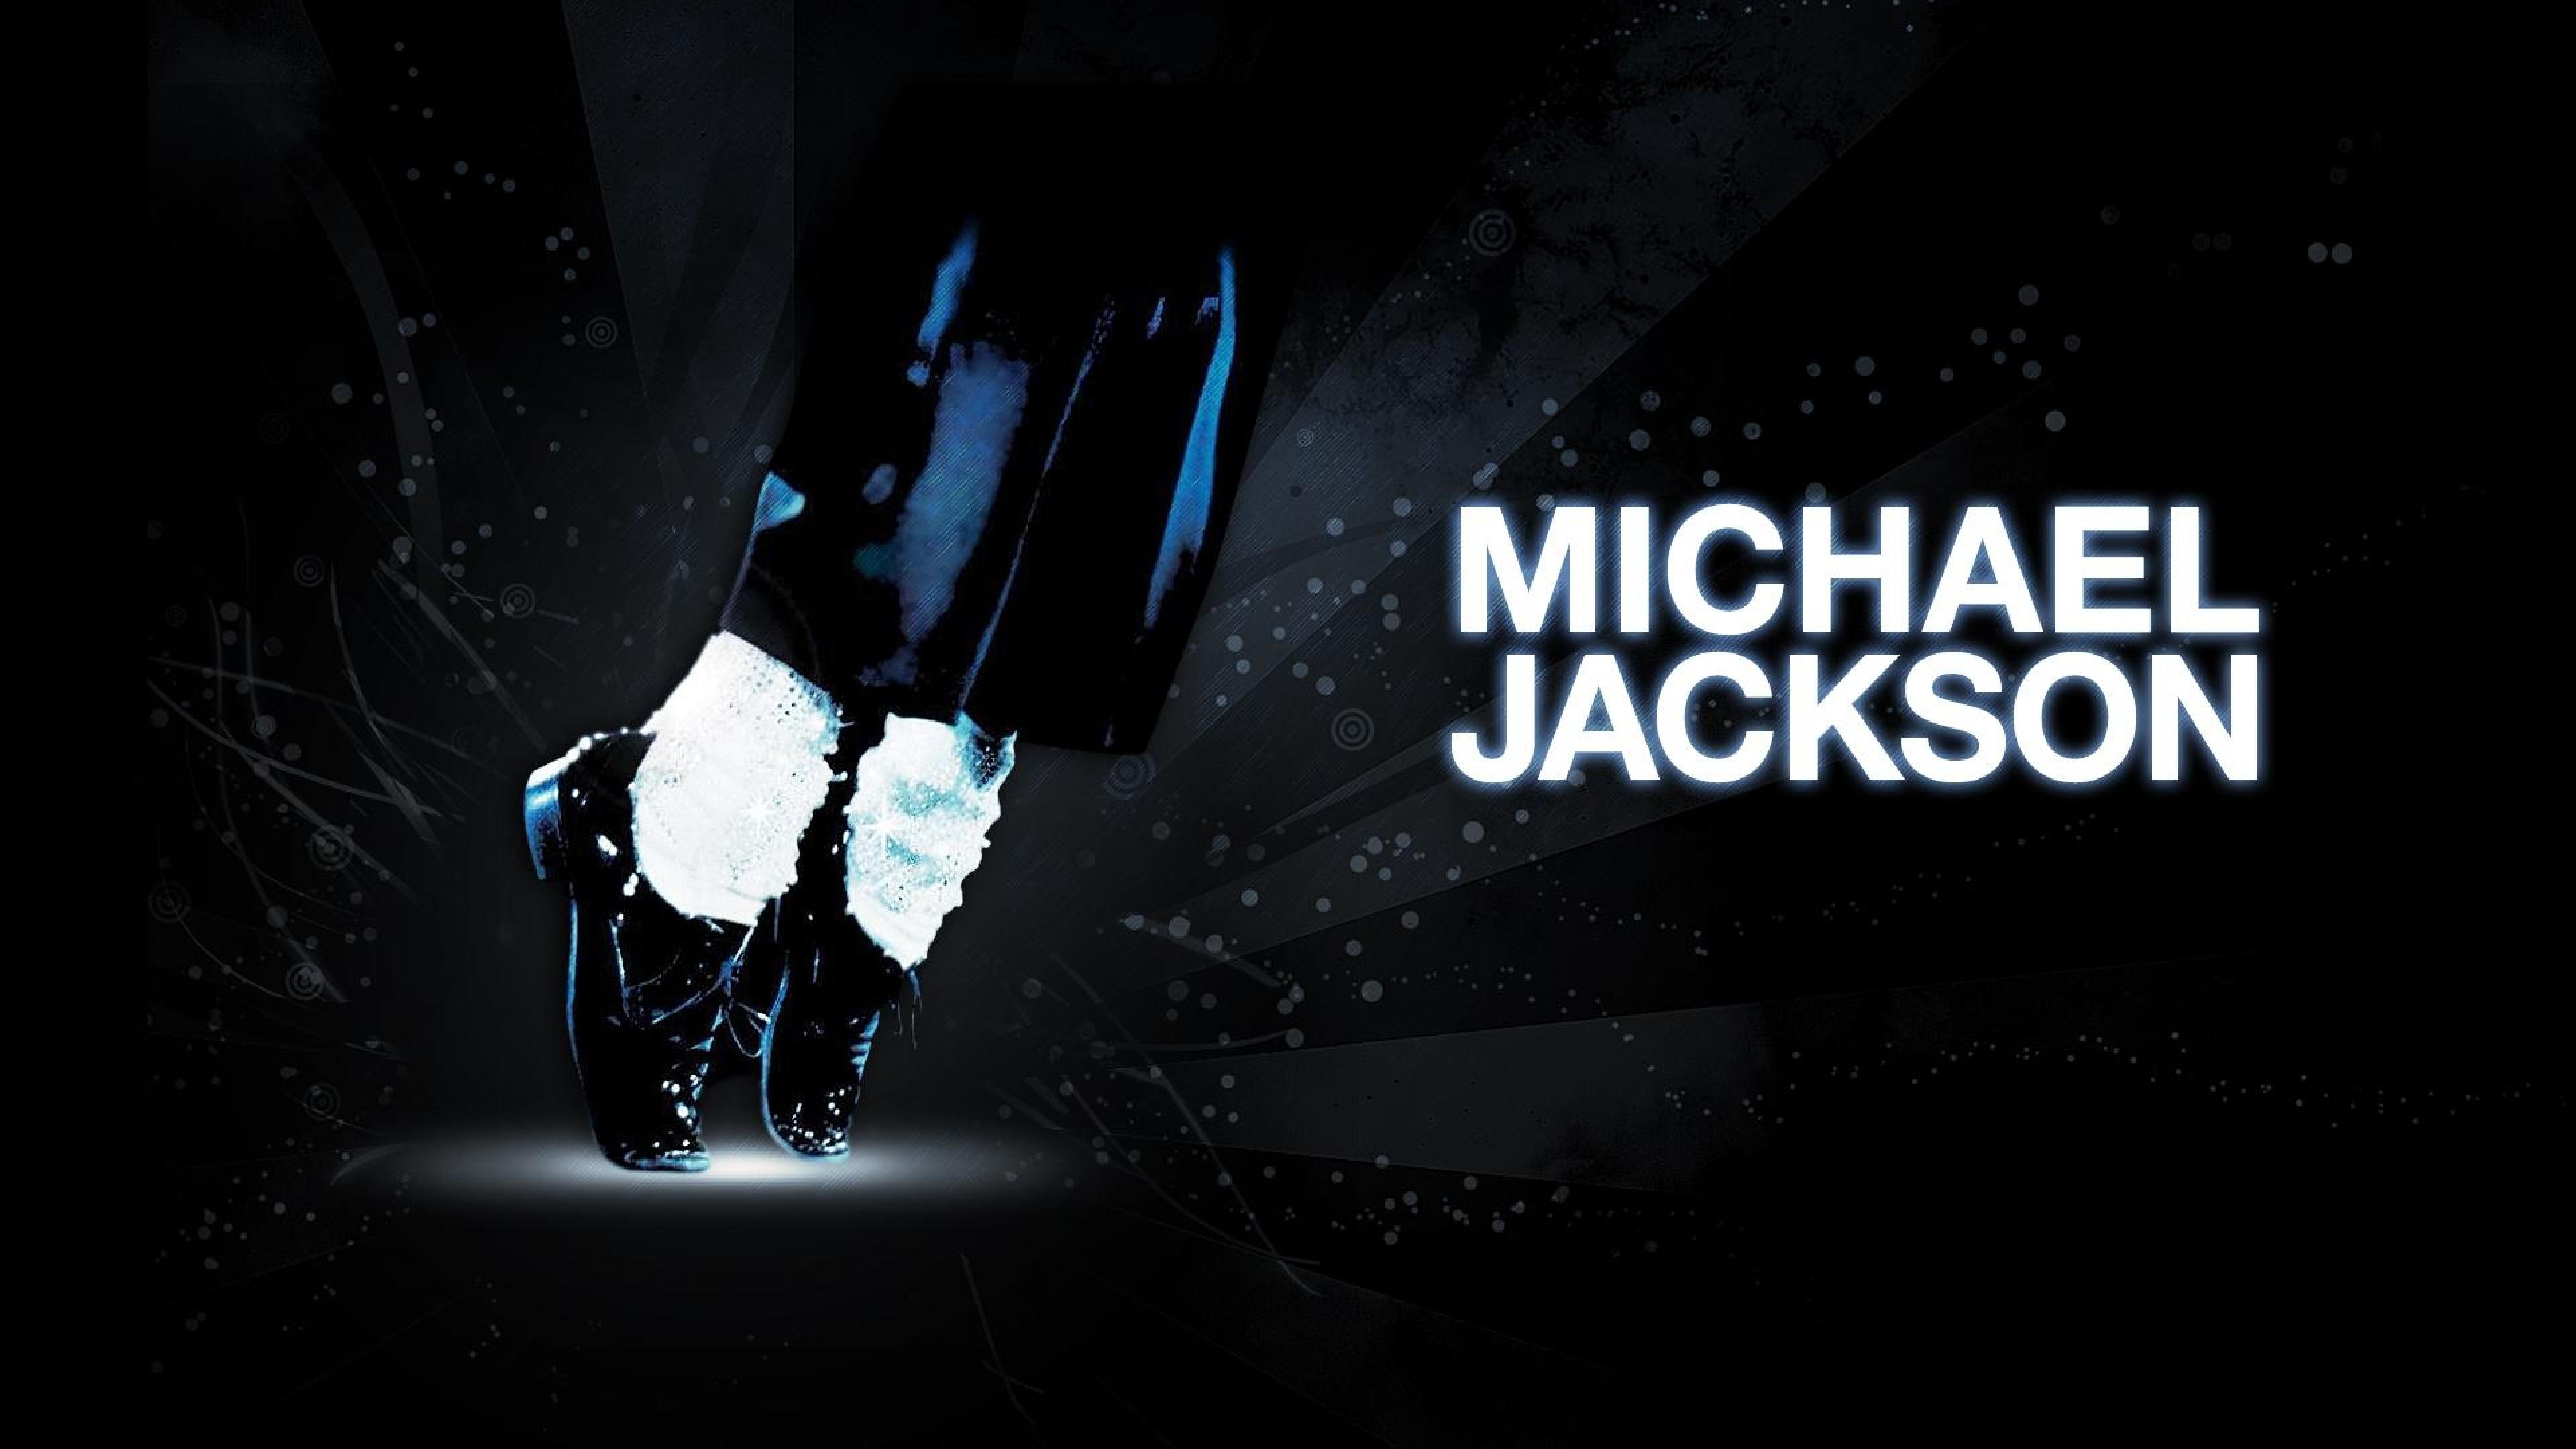 Michael Jackson Wallpaper High Resolution and Quality Download